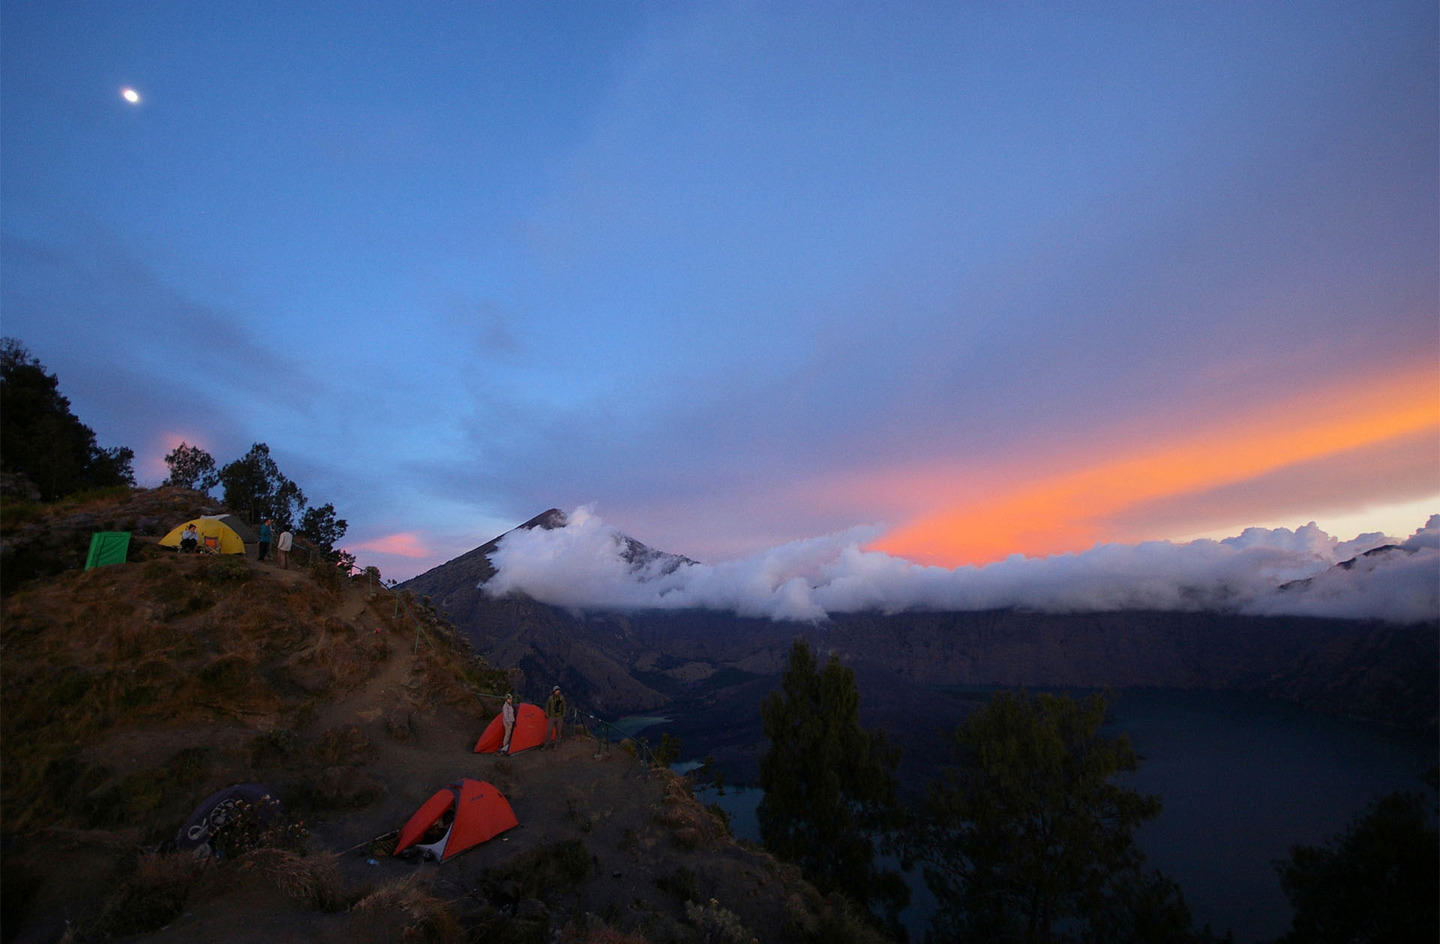 Indonesia Mt Rinjani in Lombok by Alister Munro